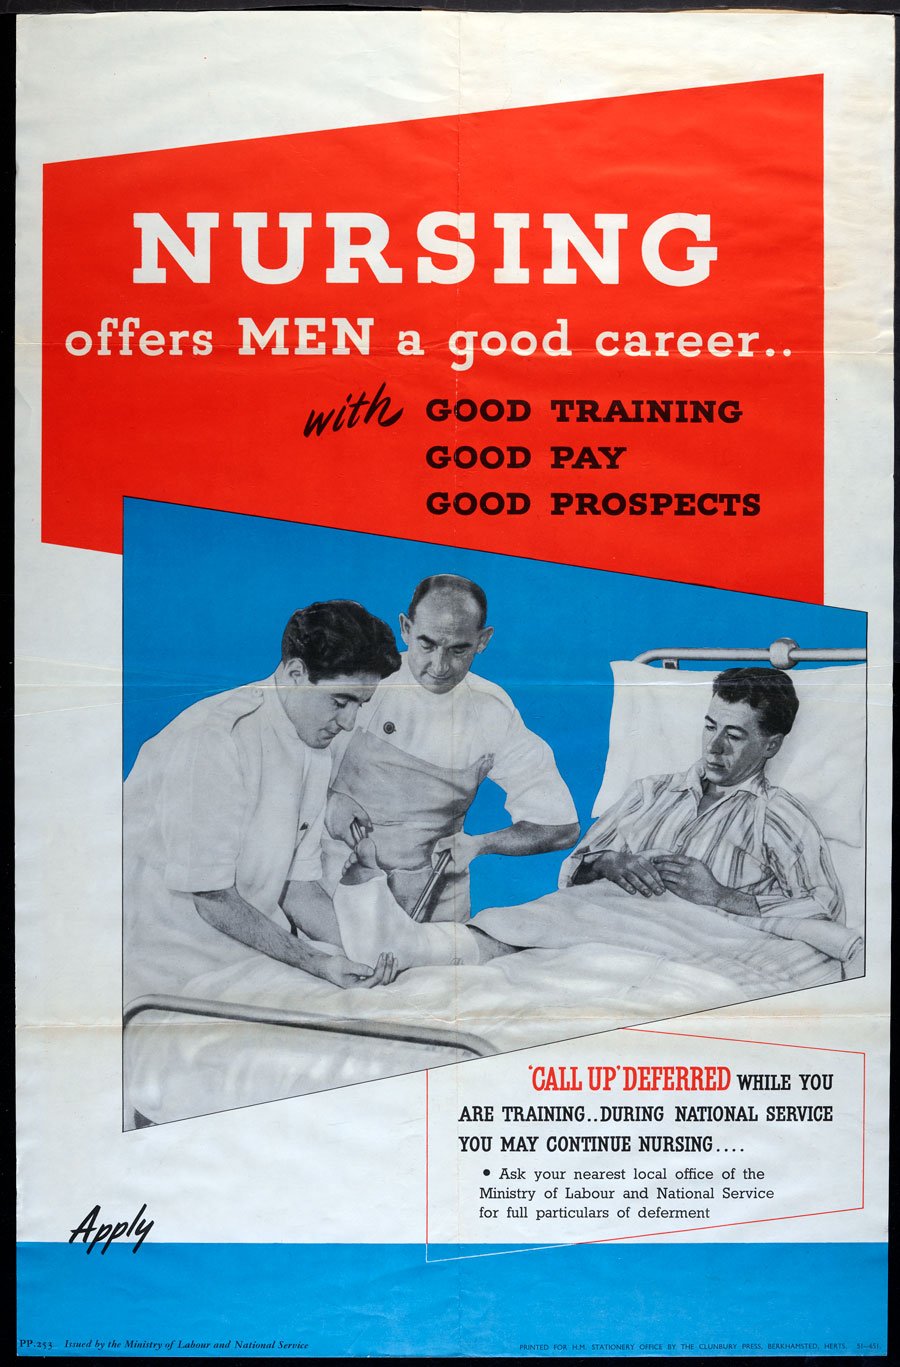 A poster with 'Nursing' title featuring a photo of two male nurses with a patient.